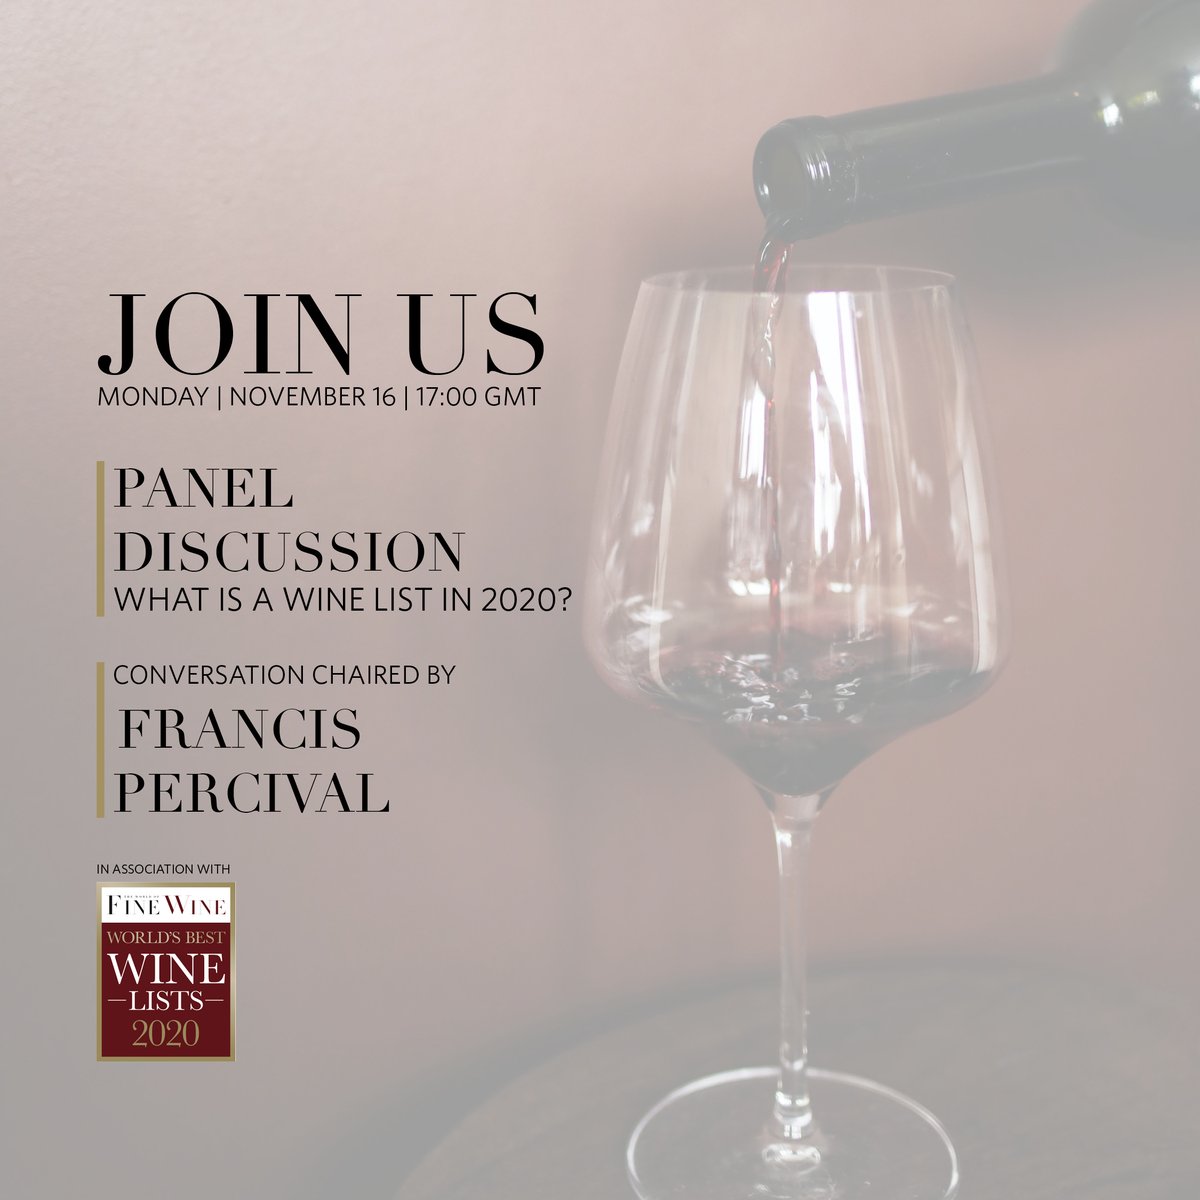 Join our panel discussion addressing the urgent question, “What is a wine list in 2020?” on Monday, November 16th, 17:00 GMT. Register here l8r.it/PqW7 #FrancisPercival #WFWpaneldiscussion @vinography @andrewcjefford @elinmccoy @HeidiMkinen @winejames @chngpohtiong